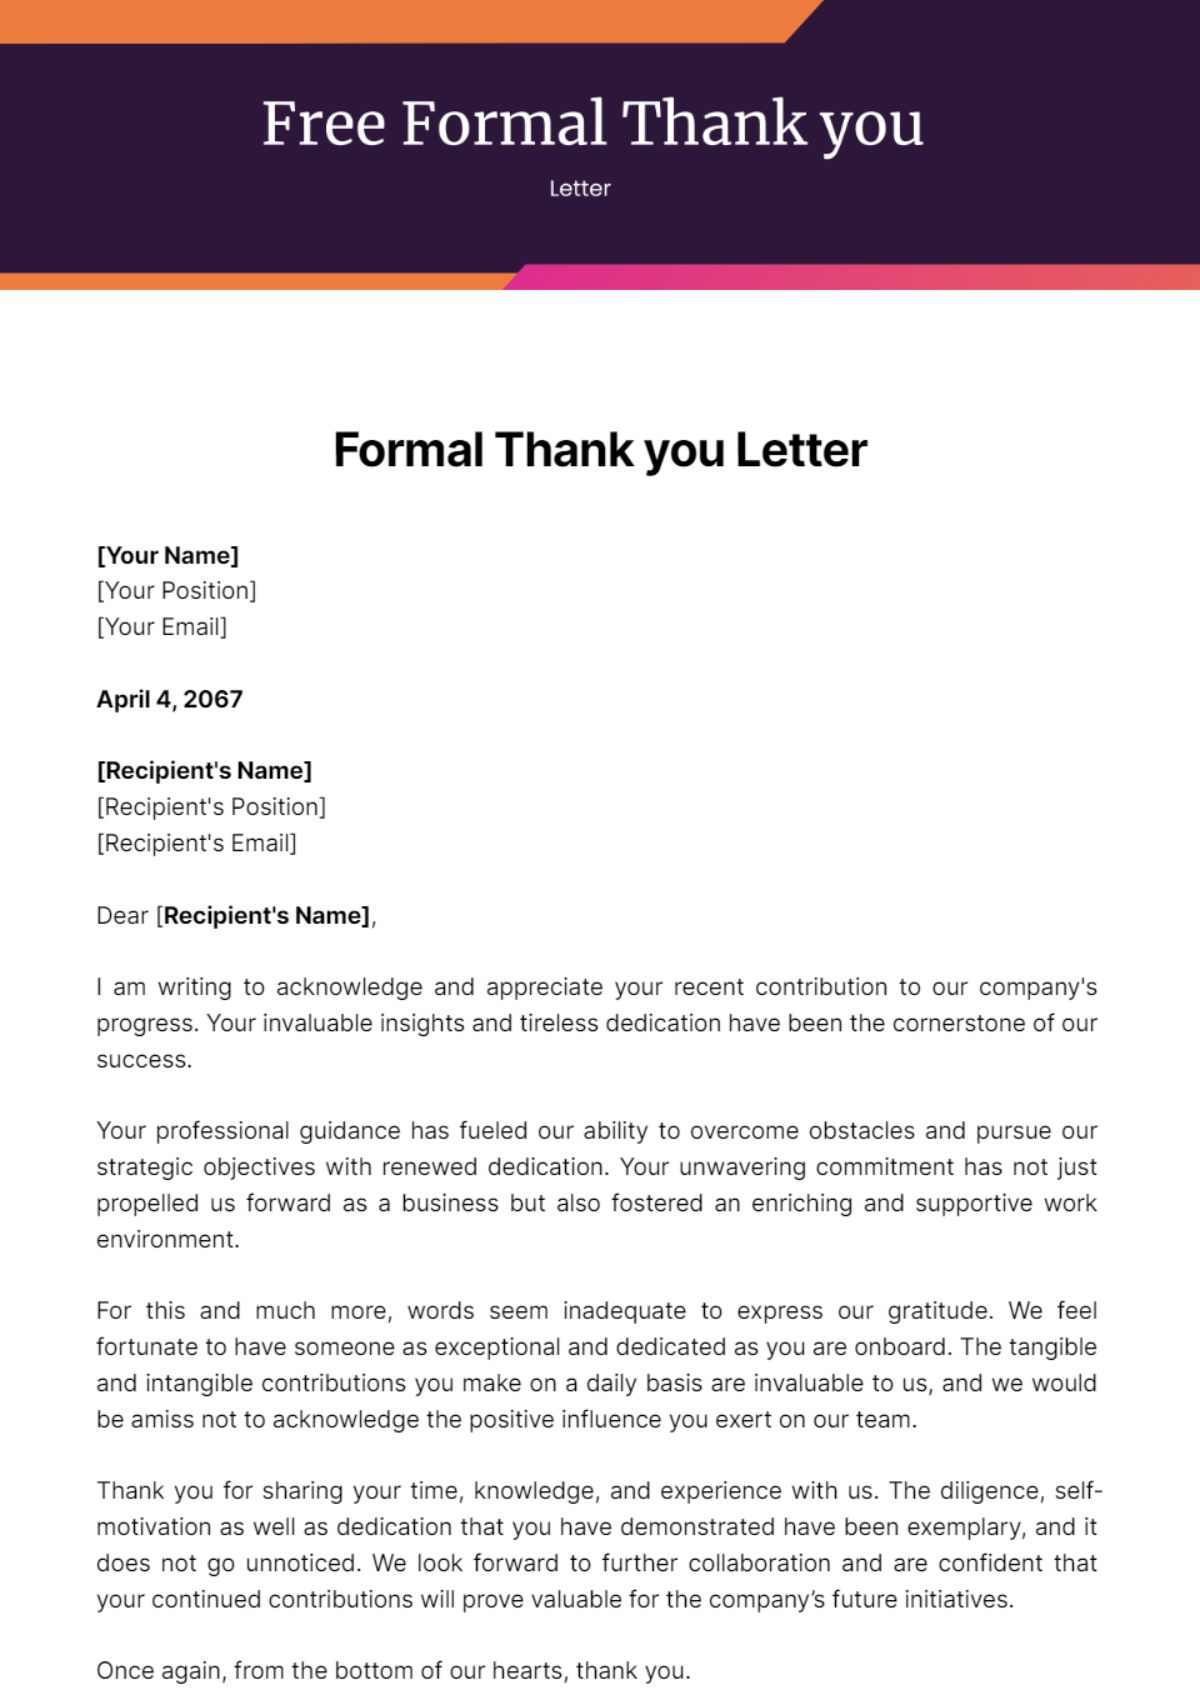 Free Formal Thank you Letter Template